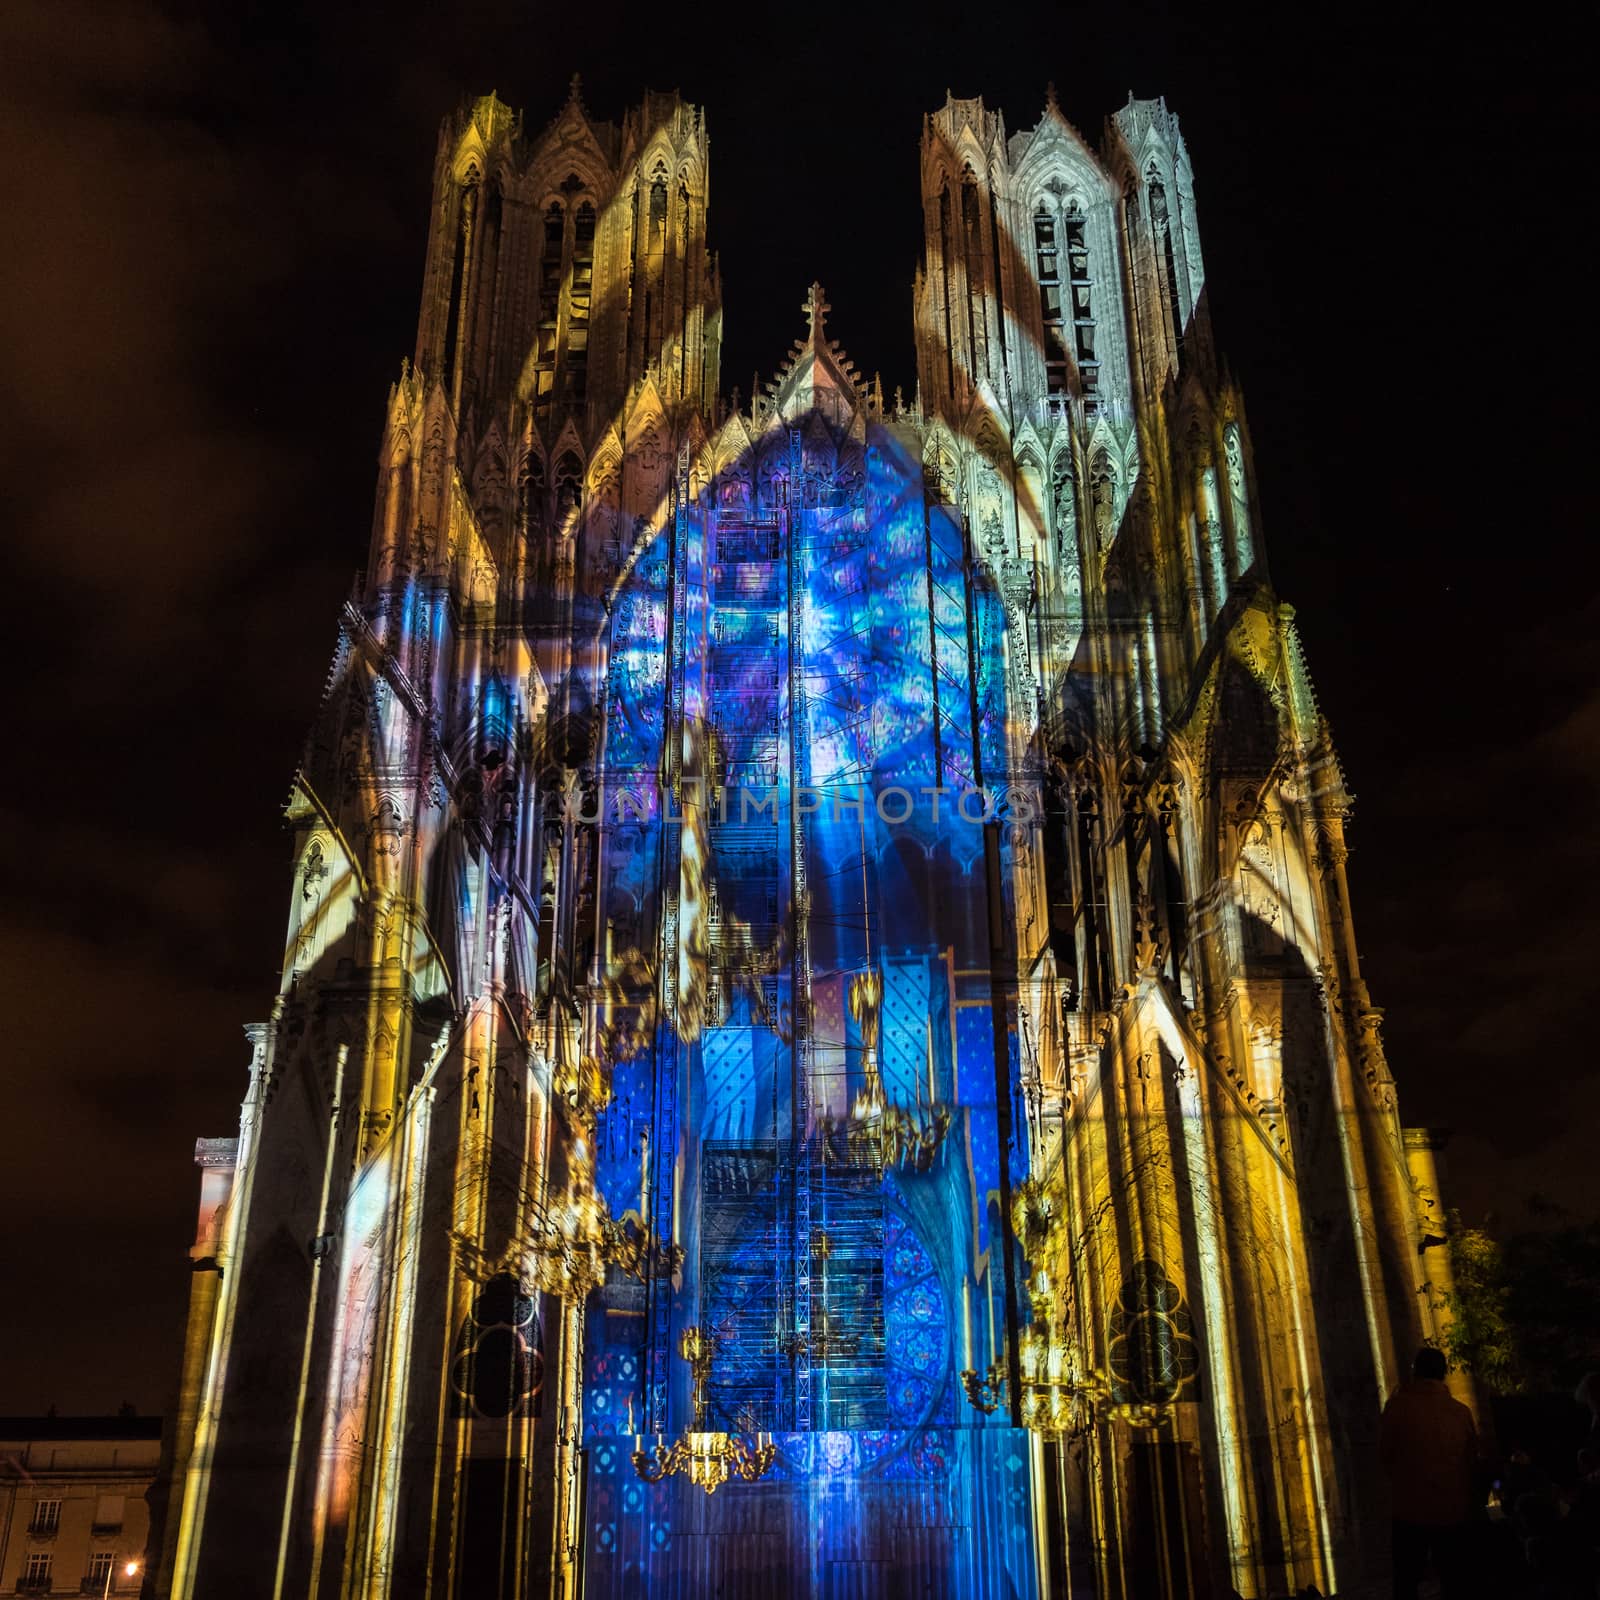 Light Show at Reims Cathedral in Reims France on September 12, 2 by phil_bird